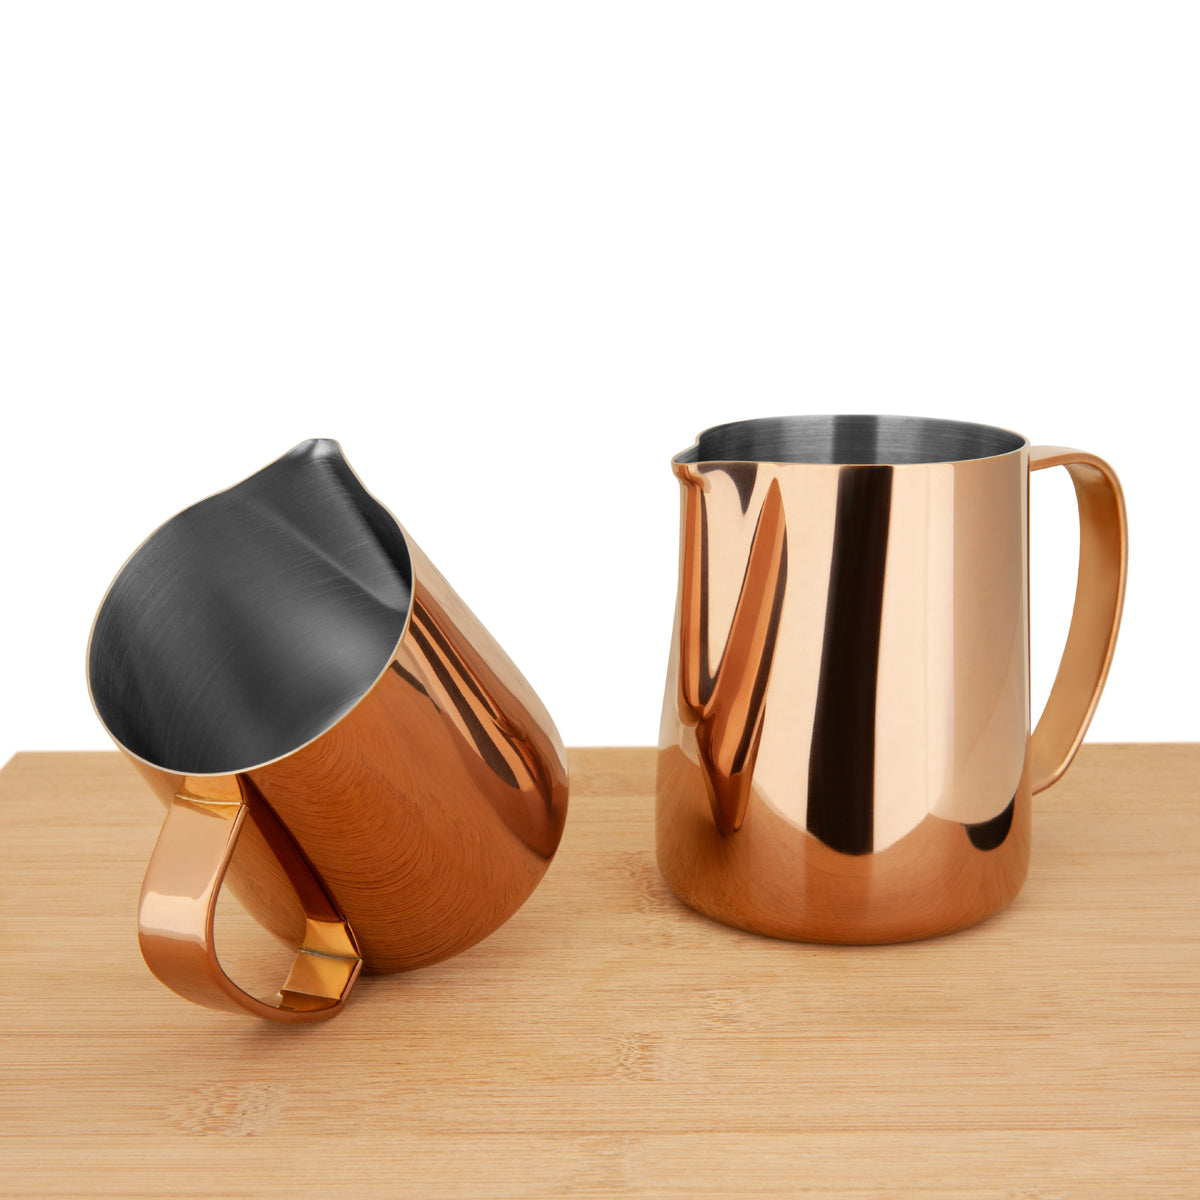 EspressoWorks Stainless Steel Milk Frothing Jug - Rose Gold (350ml and 600ml)